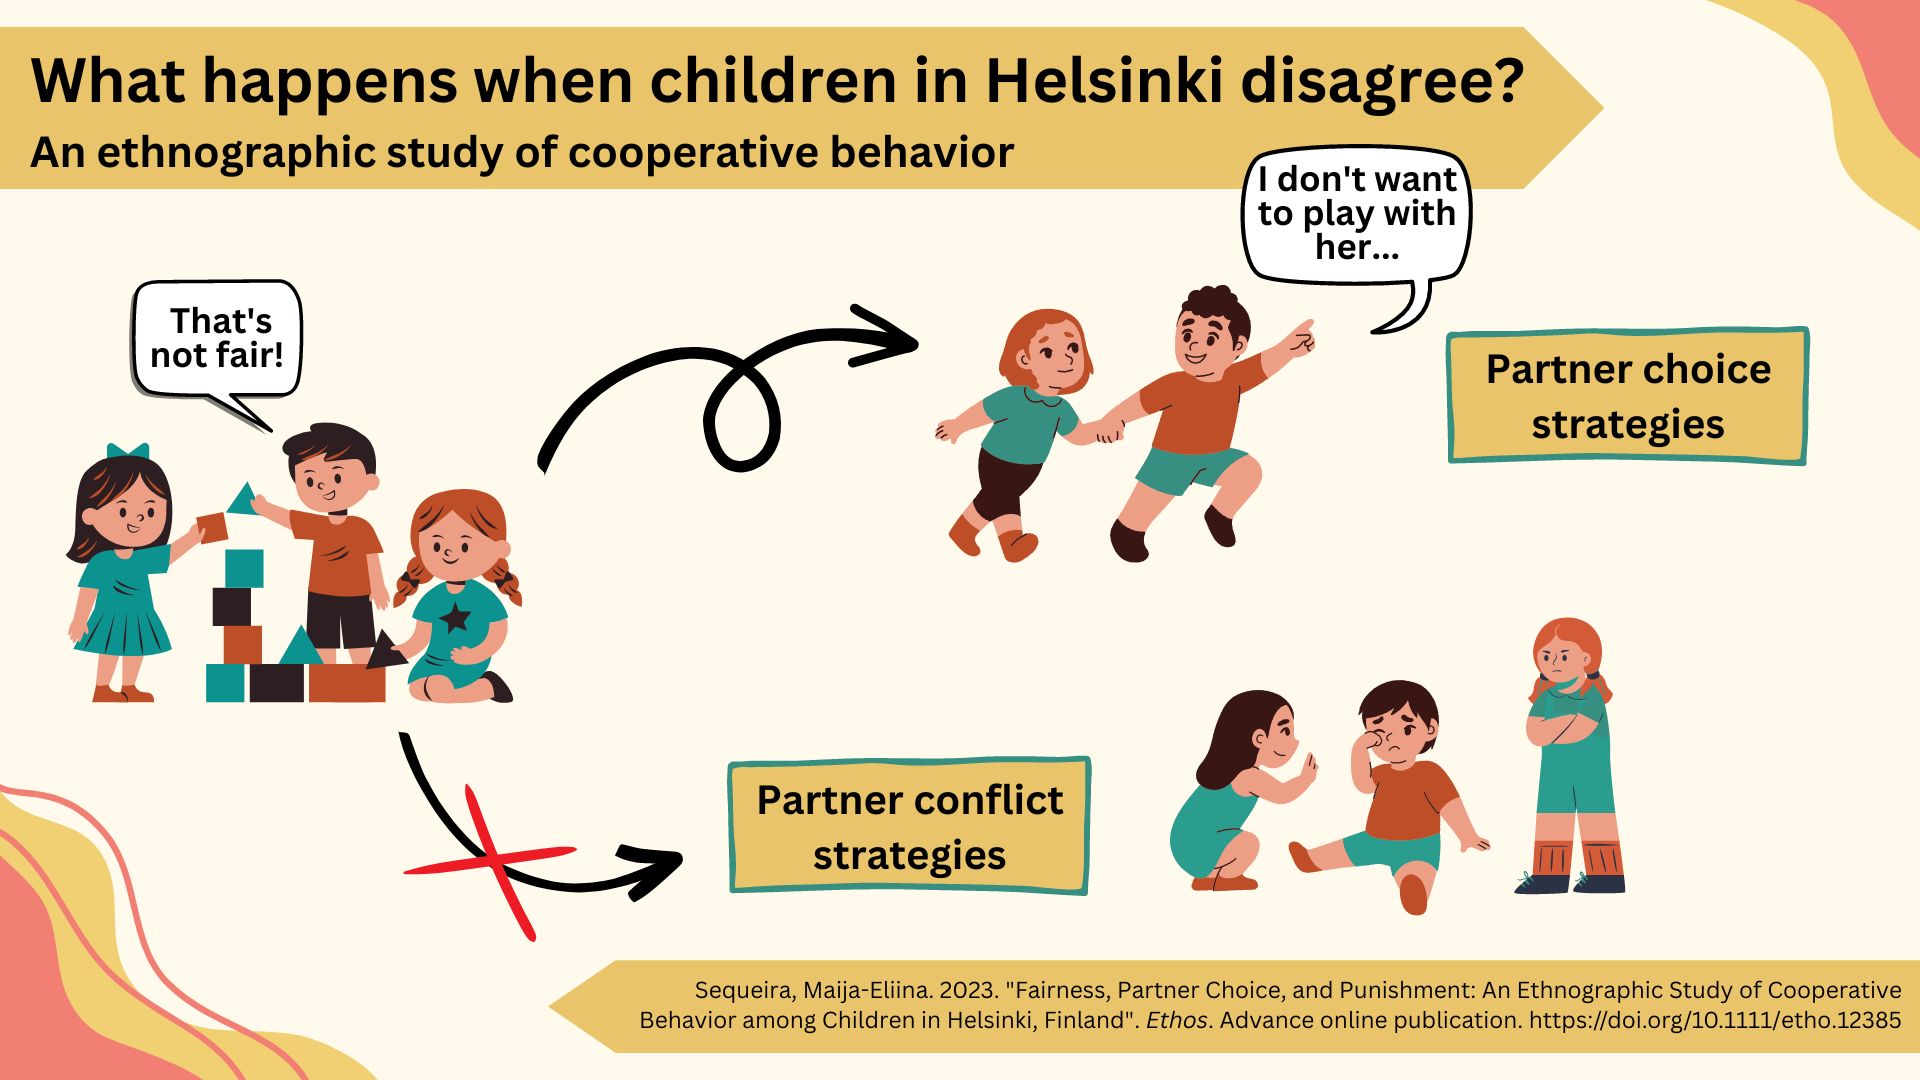 Visual abstract with the title “What happens when children in Helsinki disagree? An ethnographic study of cooperative behavior.” First image shows a group of three children playing with blocks, boy saying “that’s not fair!” Second image, labelled “partner choice strategies” shows two children holding hands, a boy is pointing and saying “I don’t want to play with her.” Third image, labelled “partner conflict strategies” shows a boy sitting crying while a girl with folded arms looks cross and another girl is smiling at the boy and extending care. 